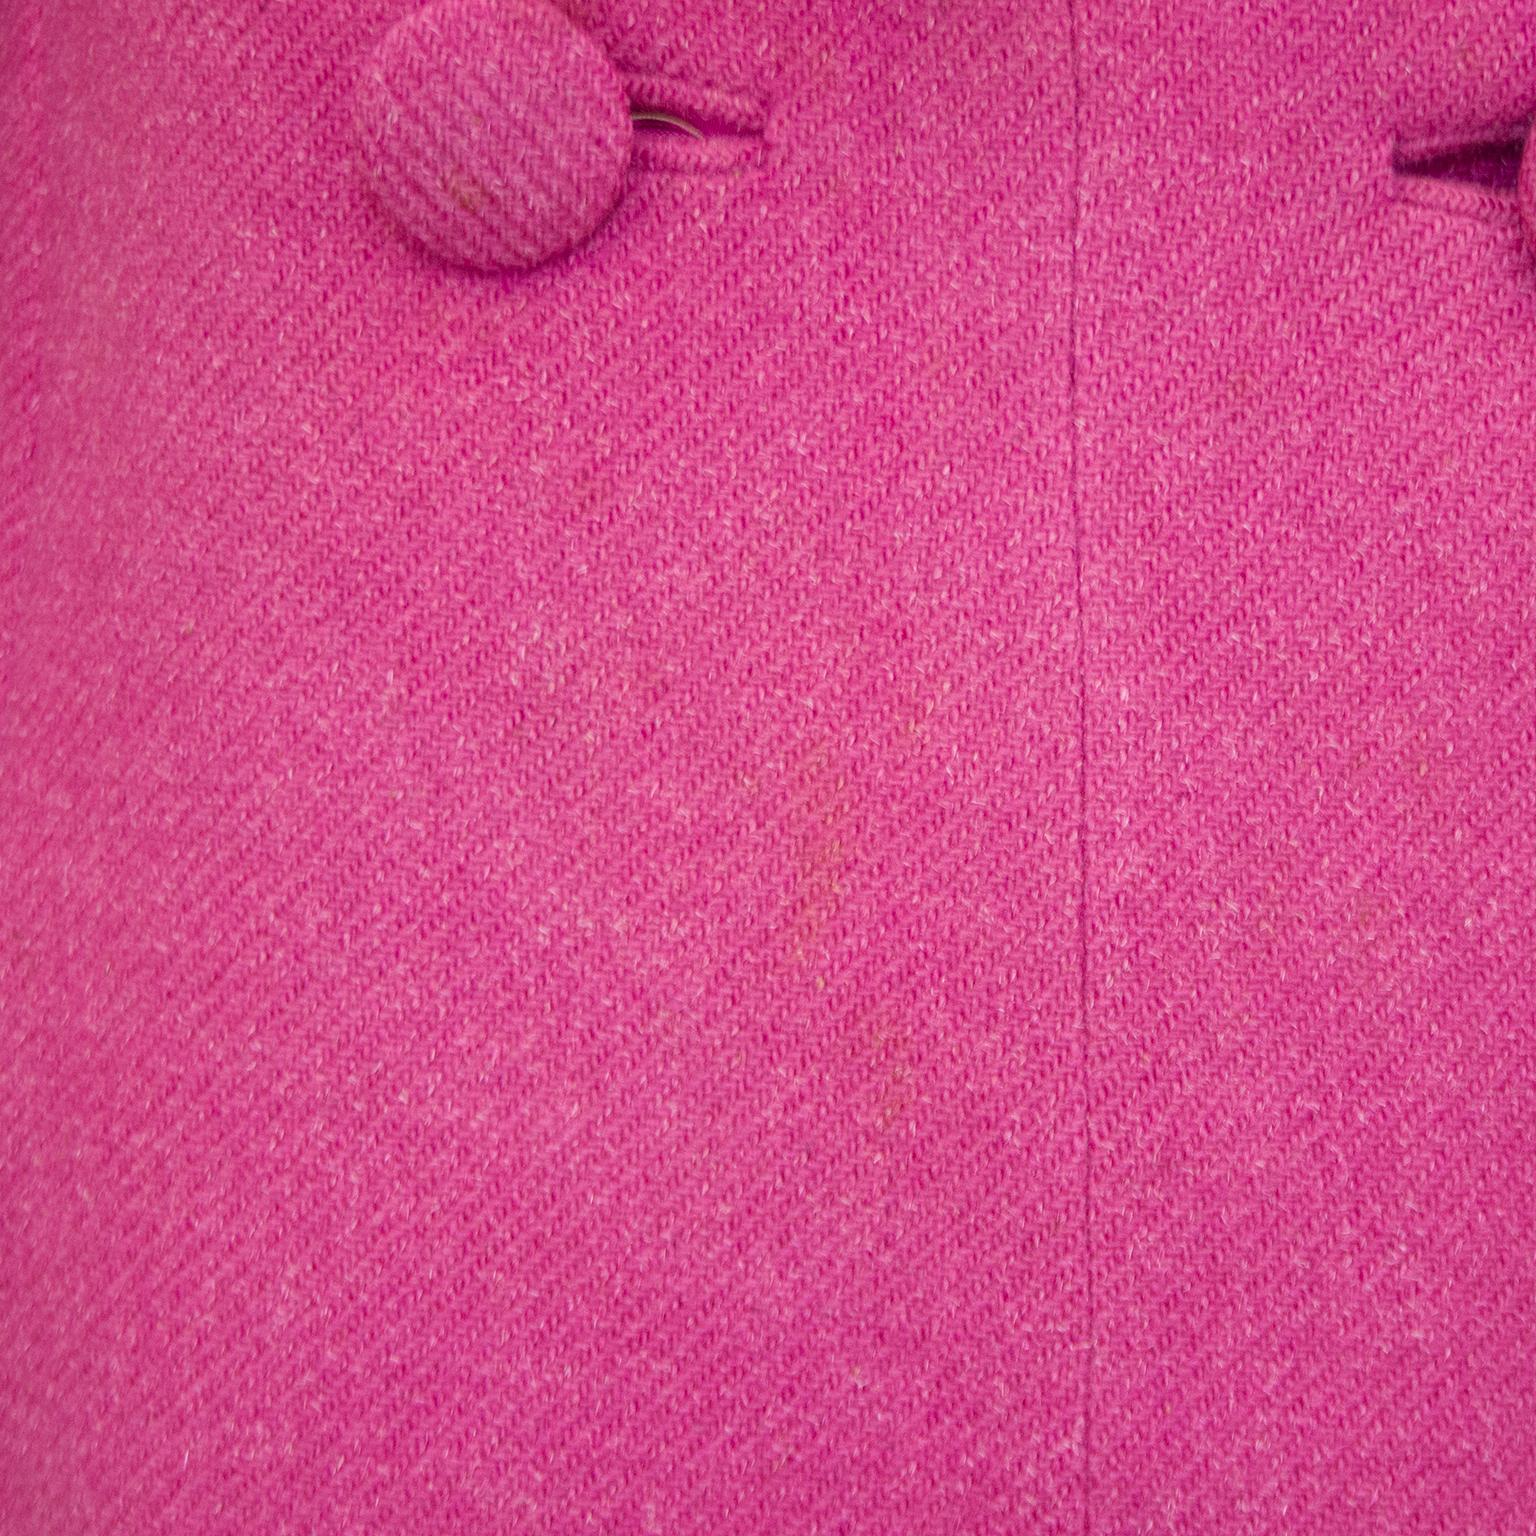 Women's 1959 Spring Collection Christian Dior Pink Wool Haute Couture Coat